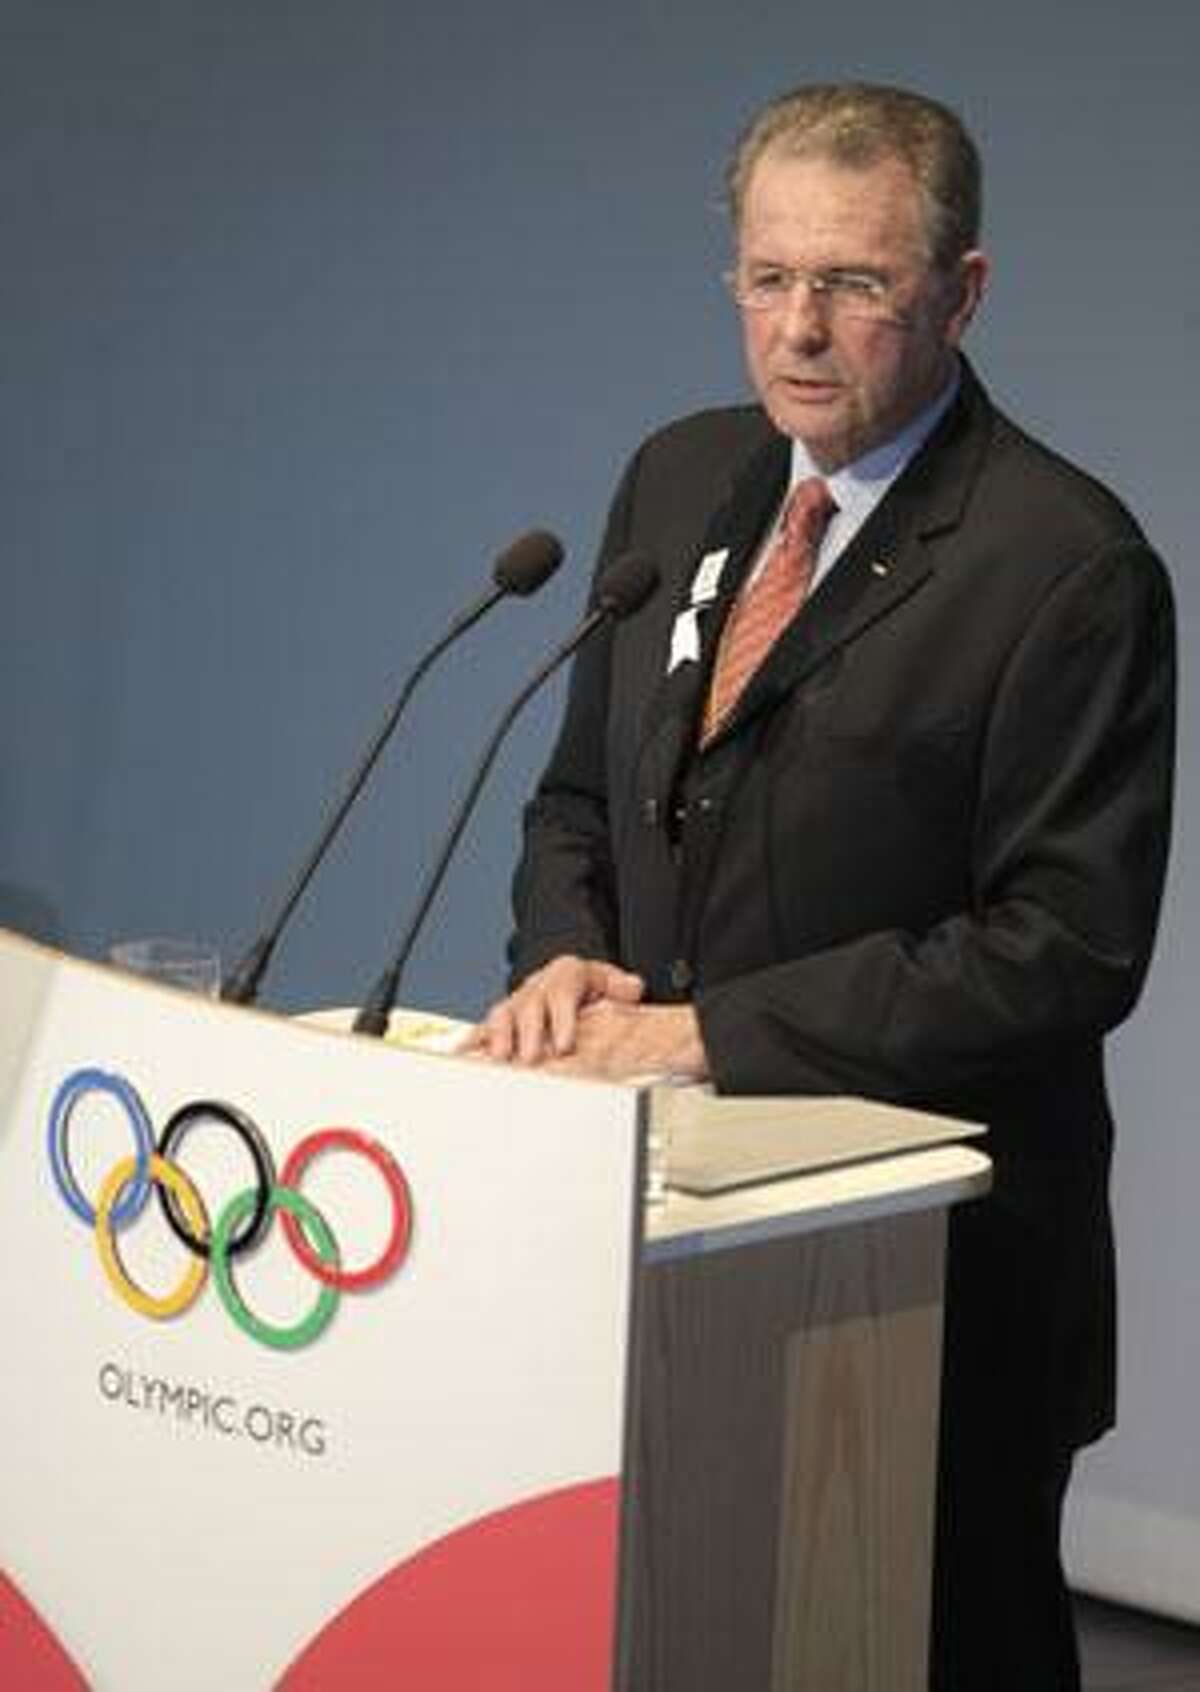 AP IOC president Jacques Rogge speaks during the opening ceremony of the 121st IOC session and XIII Olympic Congress in the Opera house in Copenhagen, Thursday. Rio de Janeiro, Chicago, Madrid and Tokyo are competing for the right to host the 2016 Summer Olympic Games. The IOC will choose the winning city in a vote today in Copenhagen.